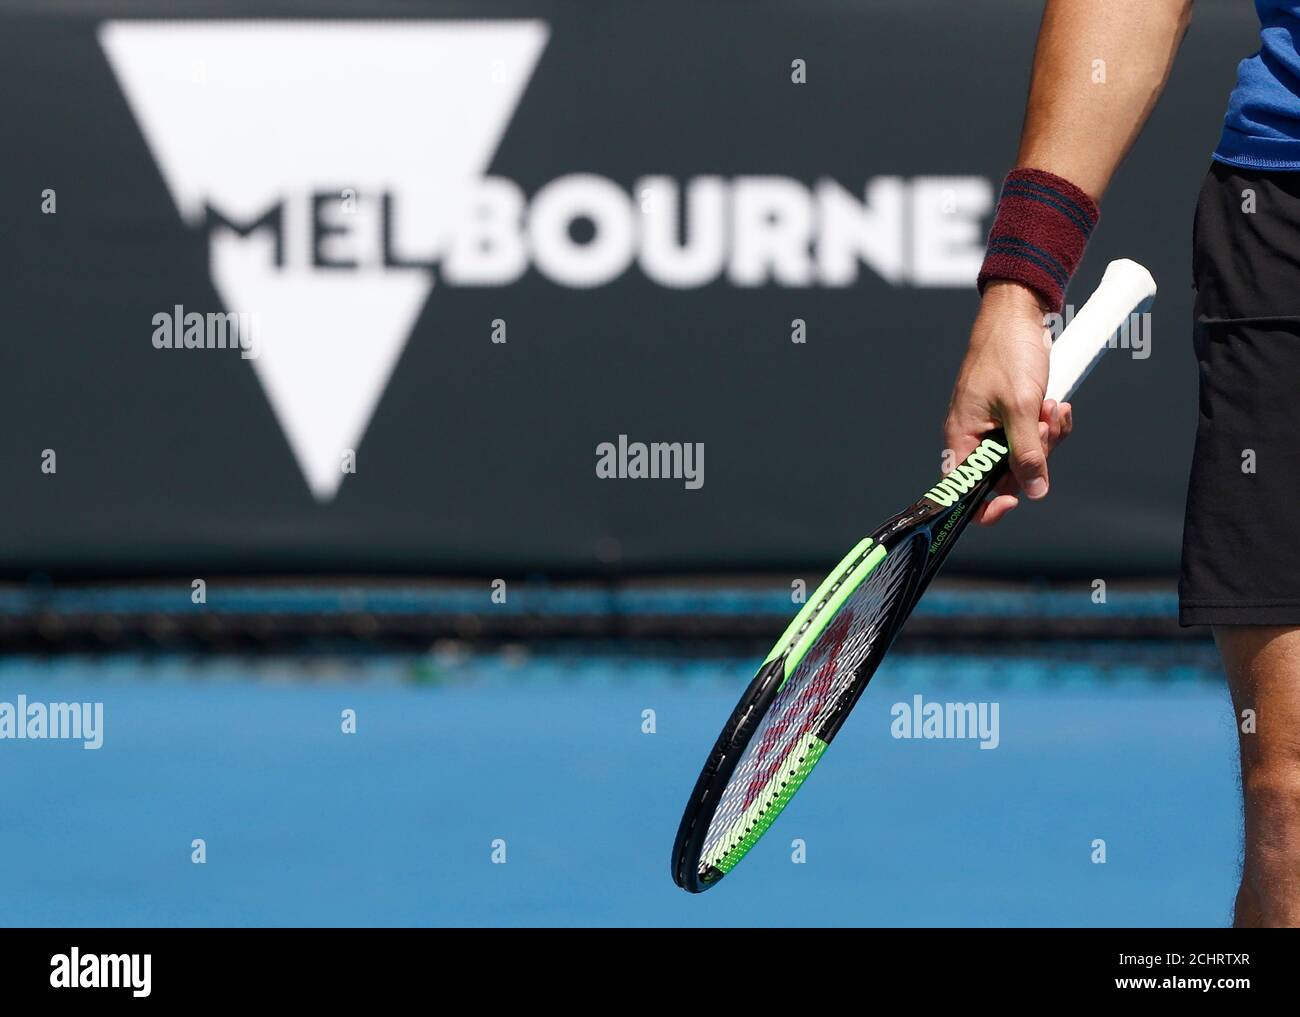 Tennis - Australian Open - Melbourne, Australia, January 14, 2018. Milos  Raonic of Canada holds his racquet during a practice session before the  Australian Open tennis tournament. REUTERS/Thomas Peter Stock Photo - Alamy